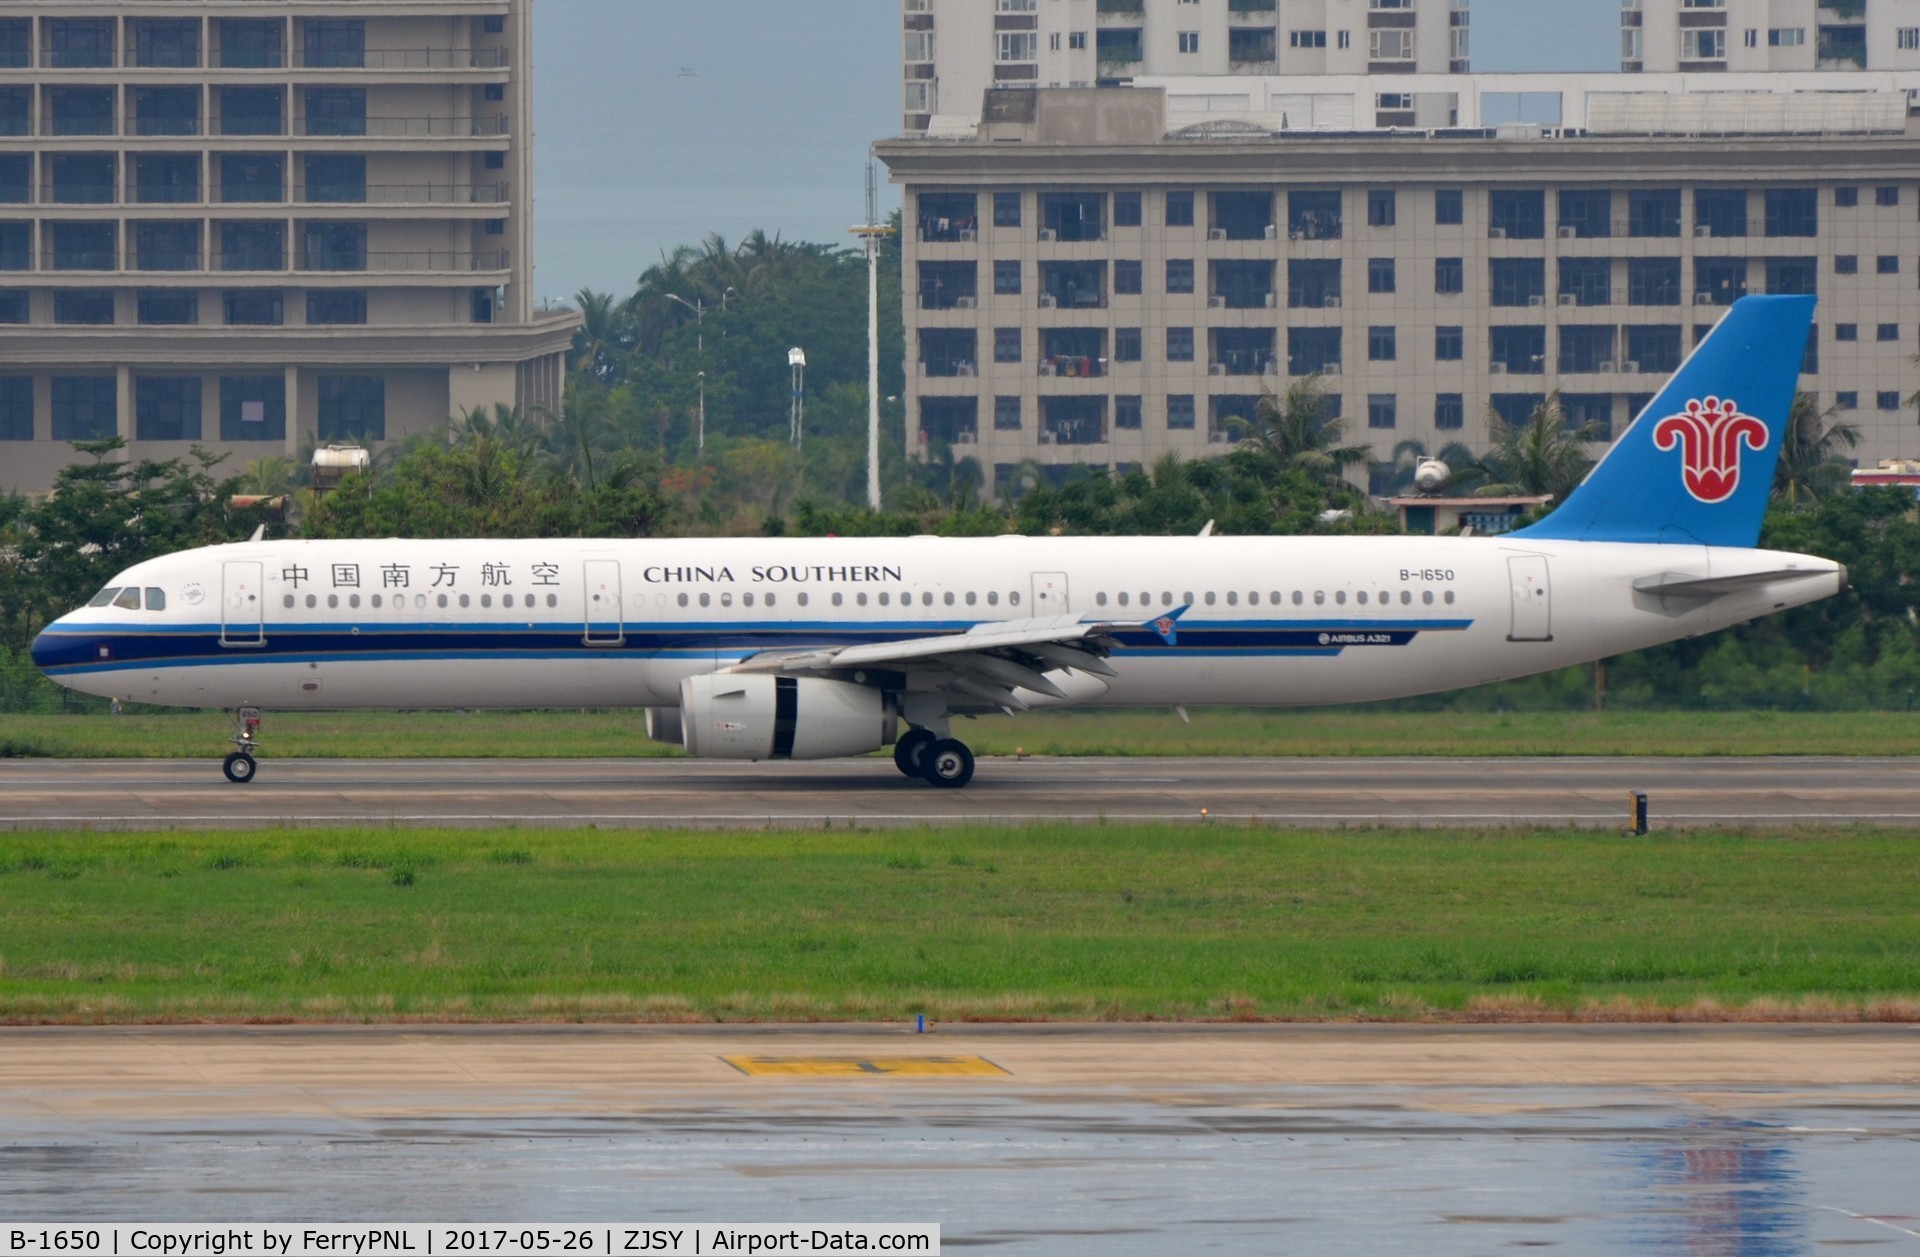 B-1650, 2015 Airbus A321-231 C/N 6556, China Southern A321 arriving